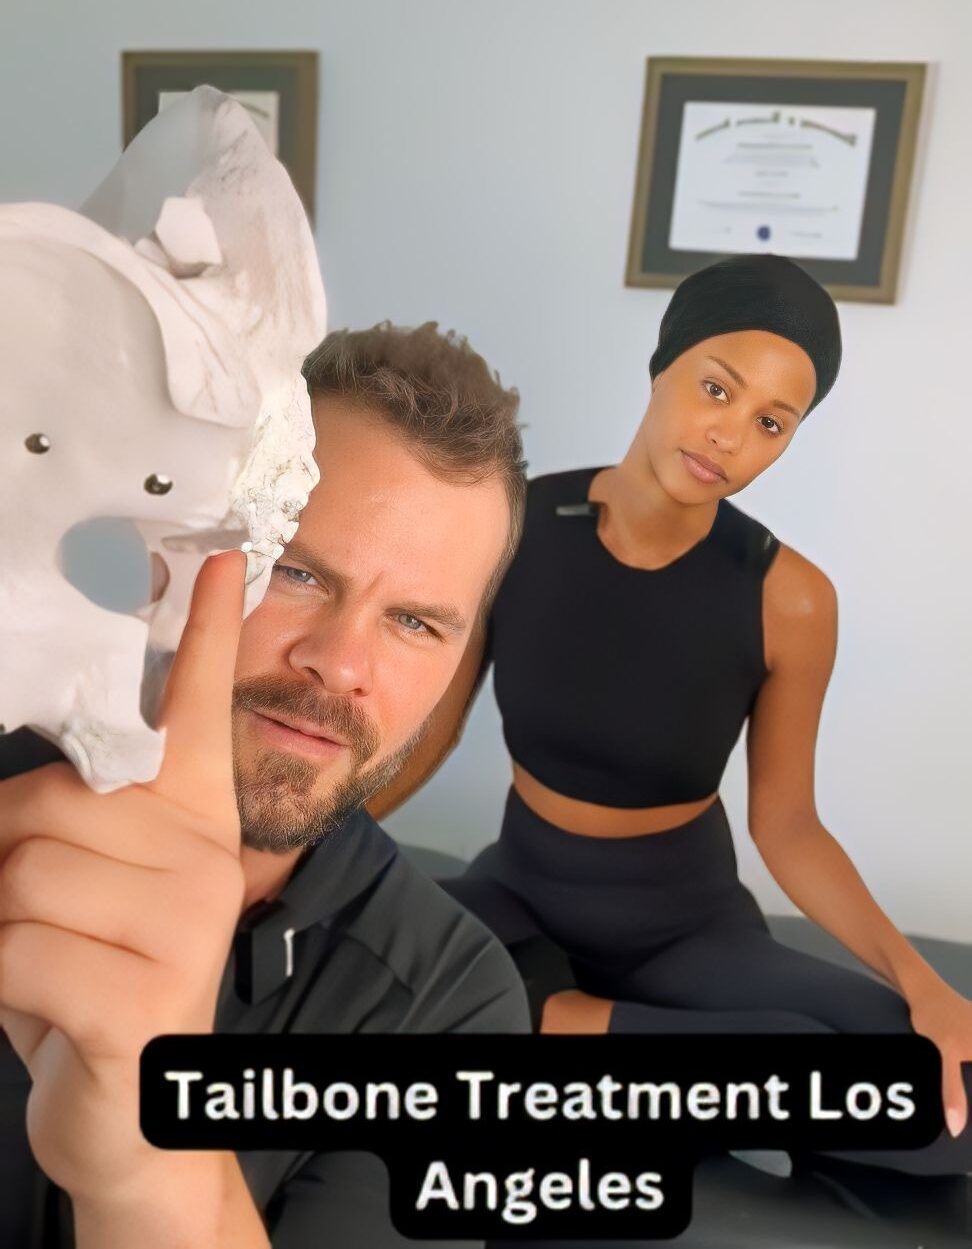 Chiropractor in los angles treating a patient with tailbone pain